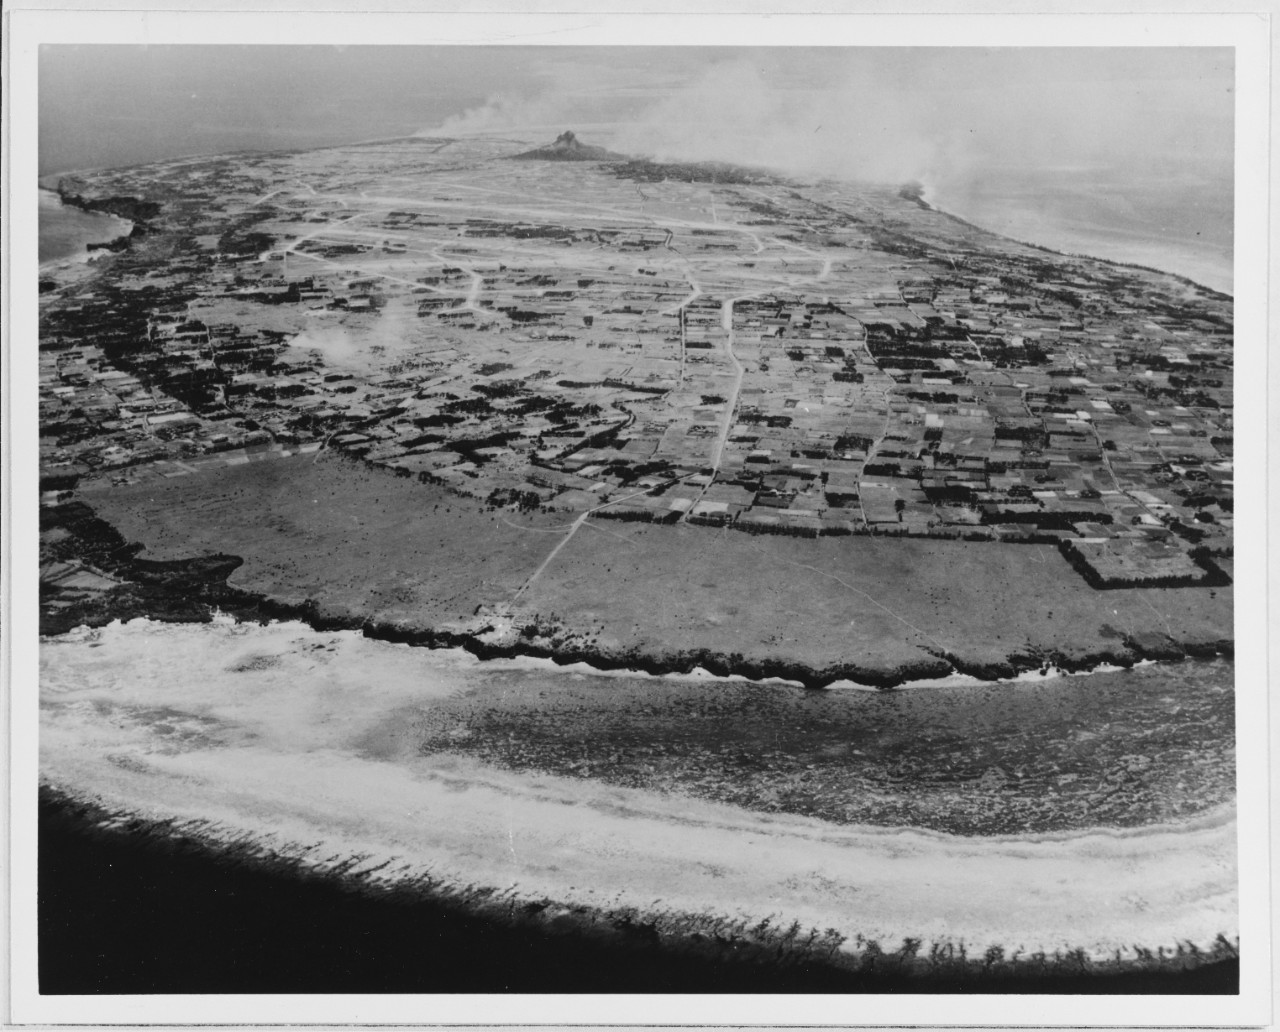 Aerial view of Ie Shima (Iwo Jima) after naval bombardment